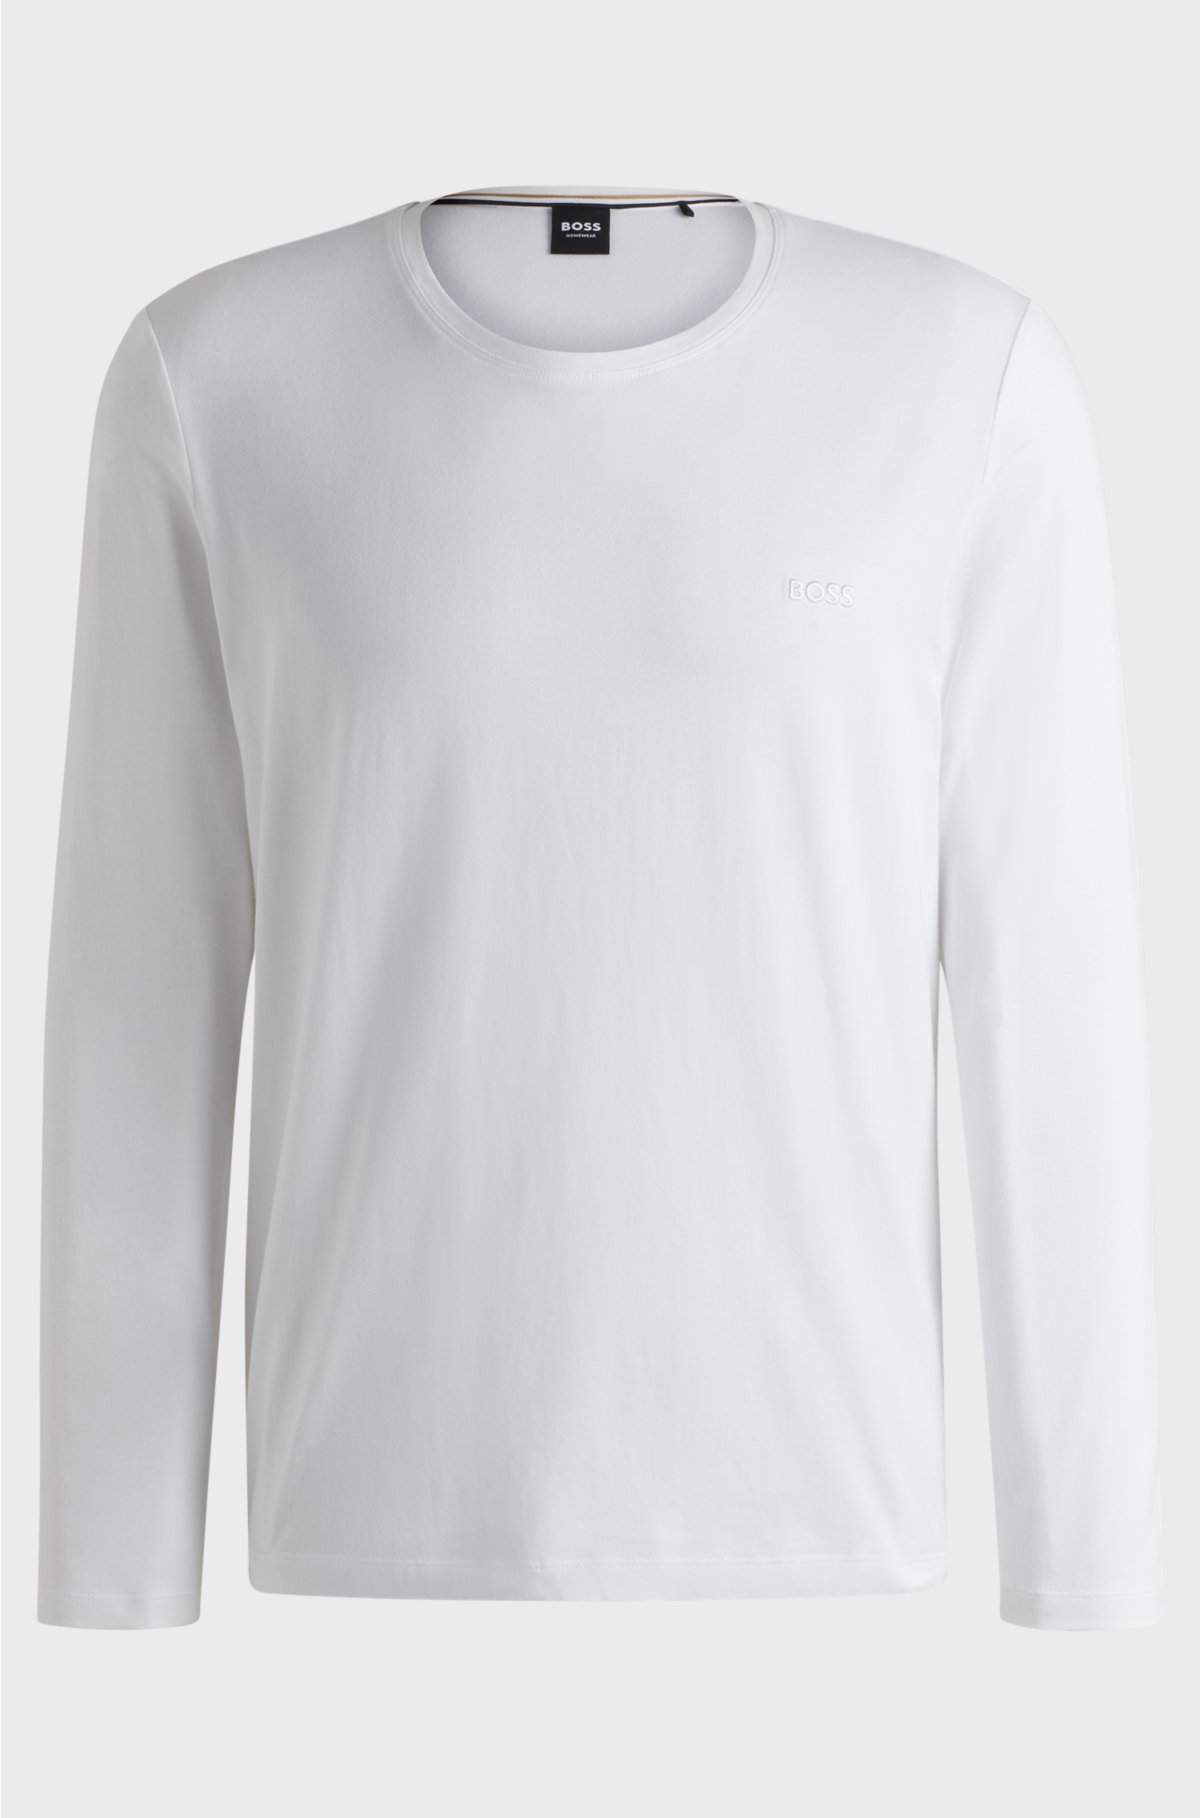 Long-sleeved T-shirt in stretch cotton with logo detail, White